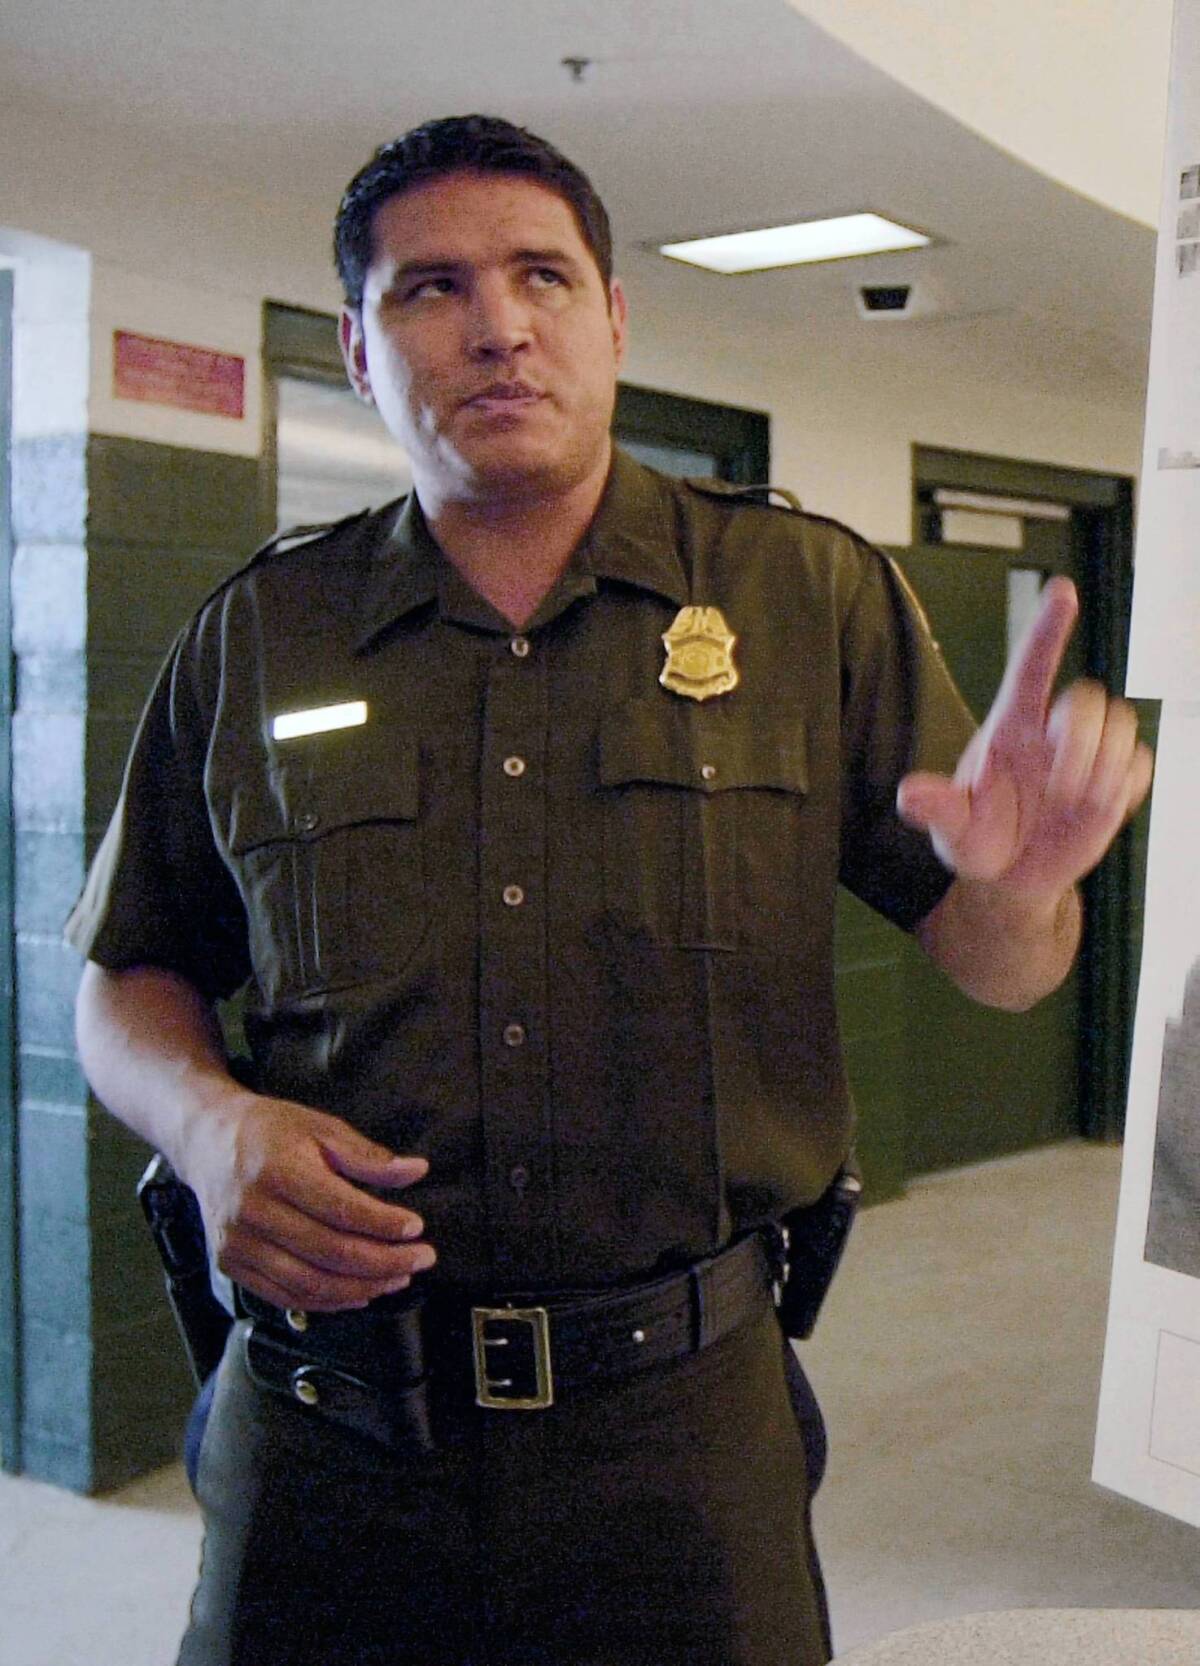 Raul Villarreal, shown in 2002, was once the face of the Border Patrol in the San Diego area, making frequent appearances on Spanish-language television newscasts as a media liaison.